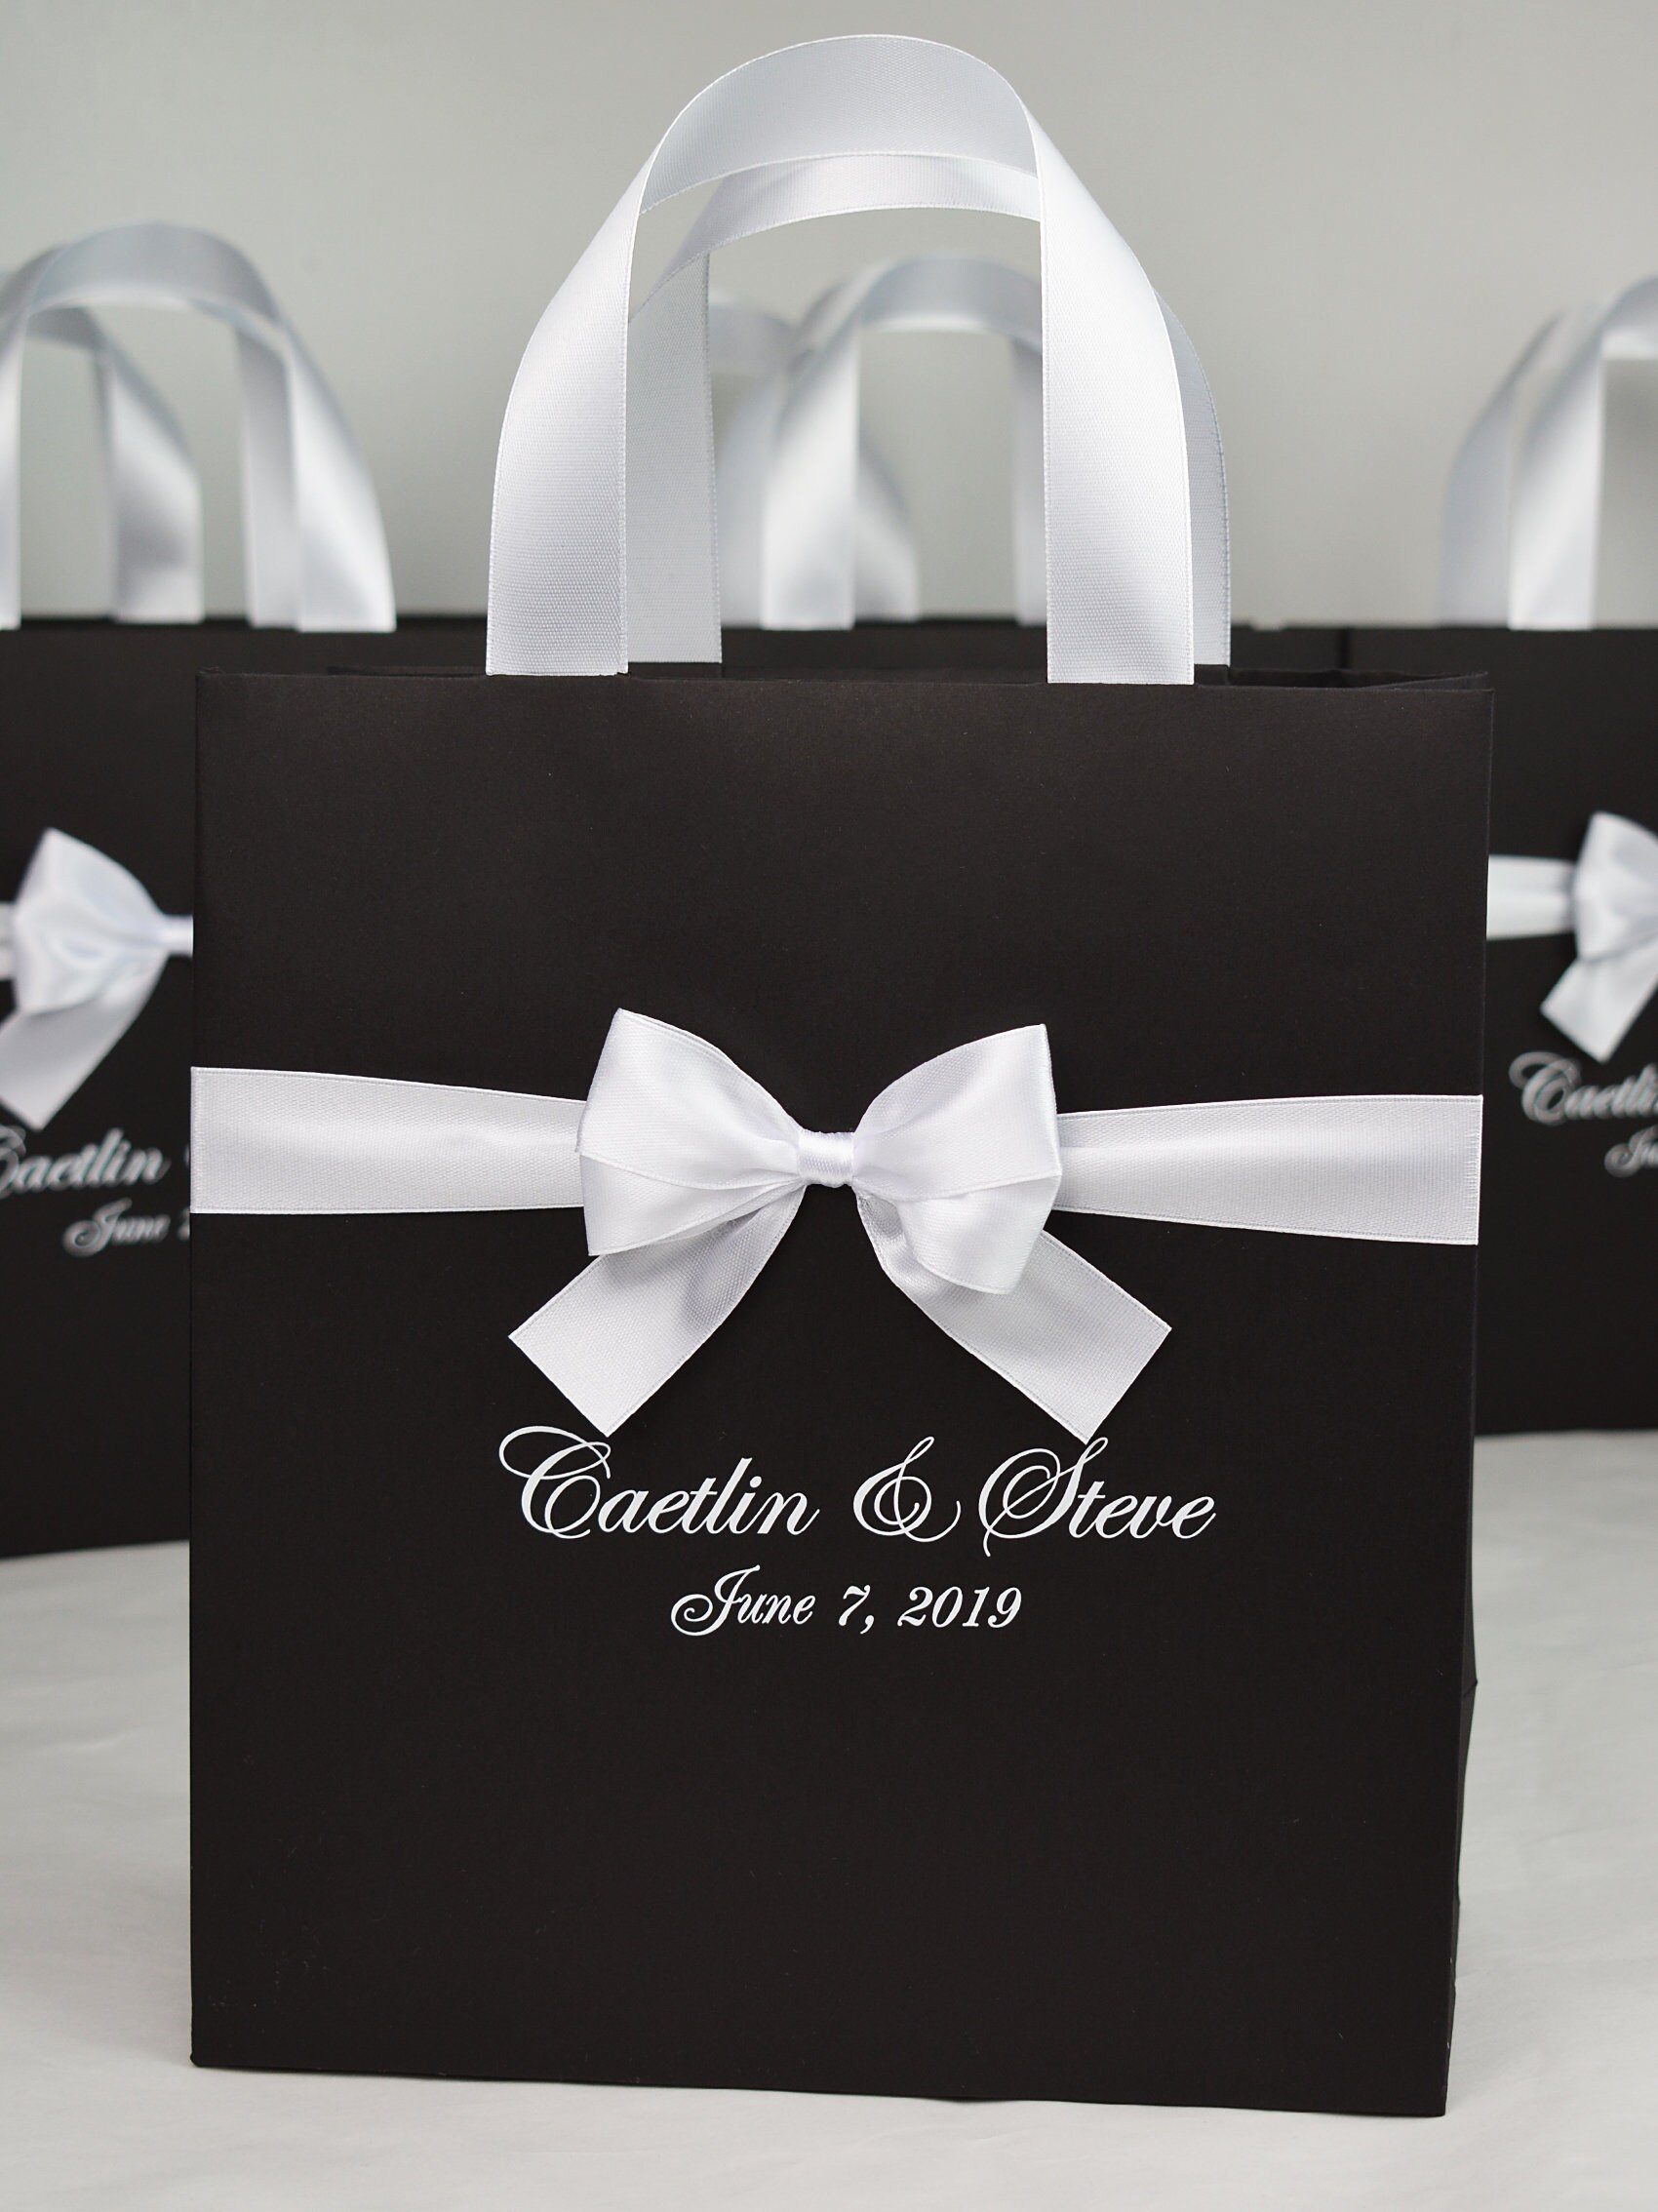  25 Pack Welcome Bags for Wedding Guests Bulk with Matching  Tissue and Ribbons,Items for Wedding Welcome Bags for Hotel Guests Holds  Bottles and Goodies, White,Just Married) : Baby